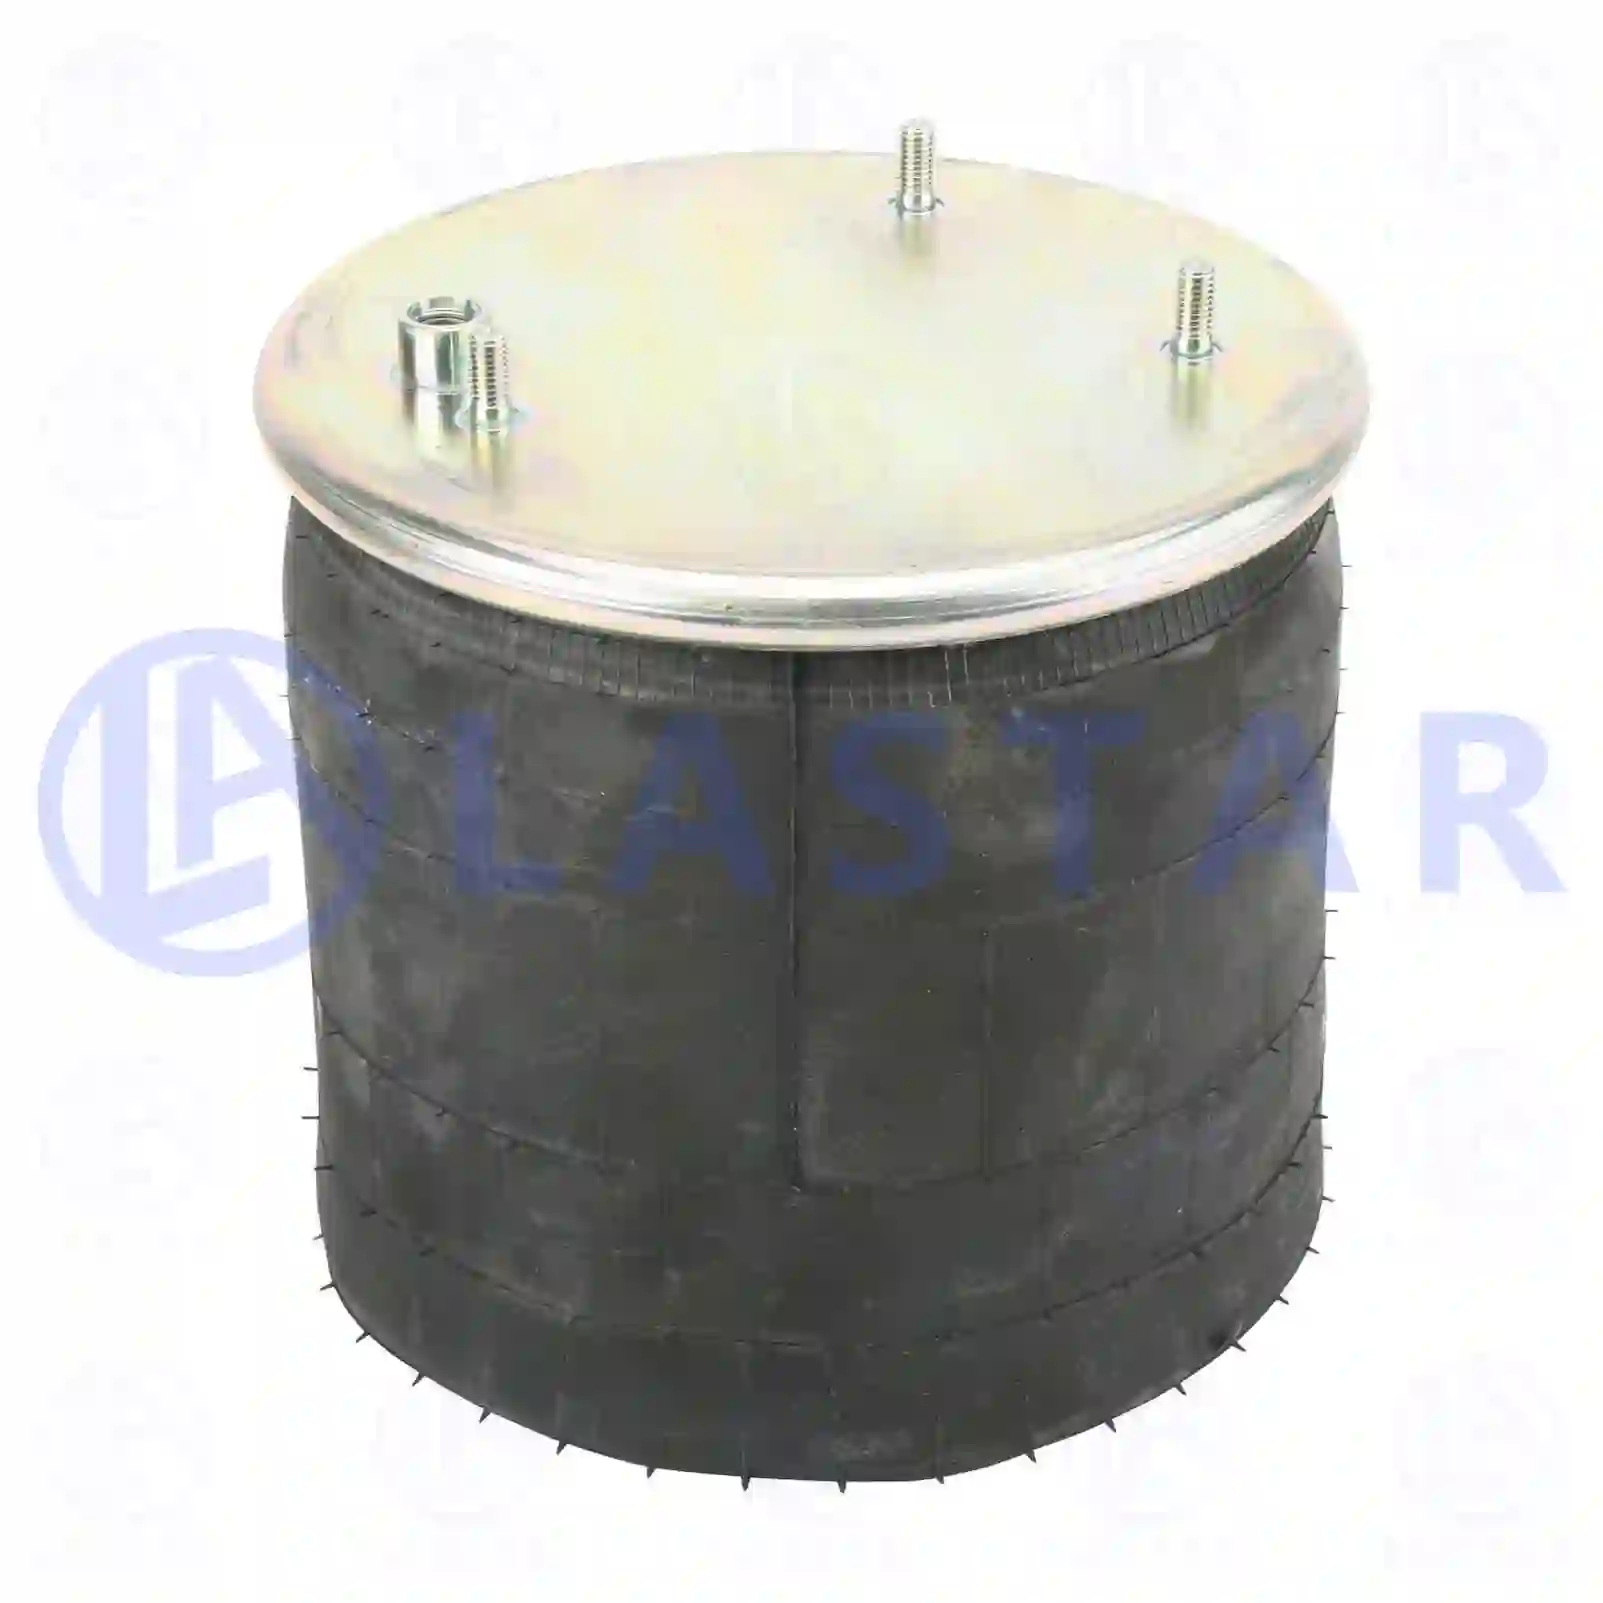 Air spring, without piston, 77728504, 0513985, 513985, MLF7017, MLF7018 ||  77728504 Lastar Spare Part | Truck Spare Parts, Auotomotive Spare Parts Air spring, without piston, 77728504, 0513985, 513985, MLF7017, MLF7018 ||  77728504 Lastar Spare Part | Truck Spare Parts, Auotomotive Spare Parts